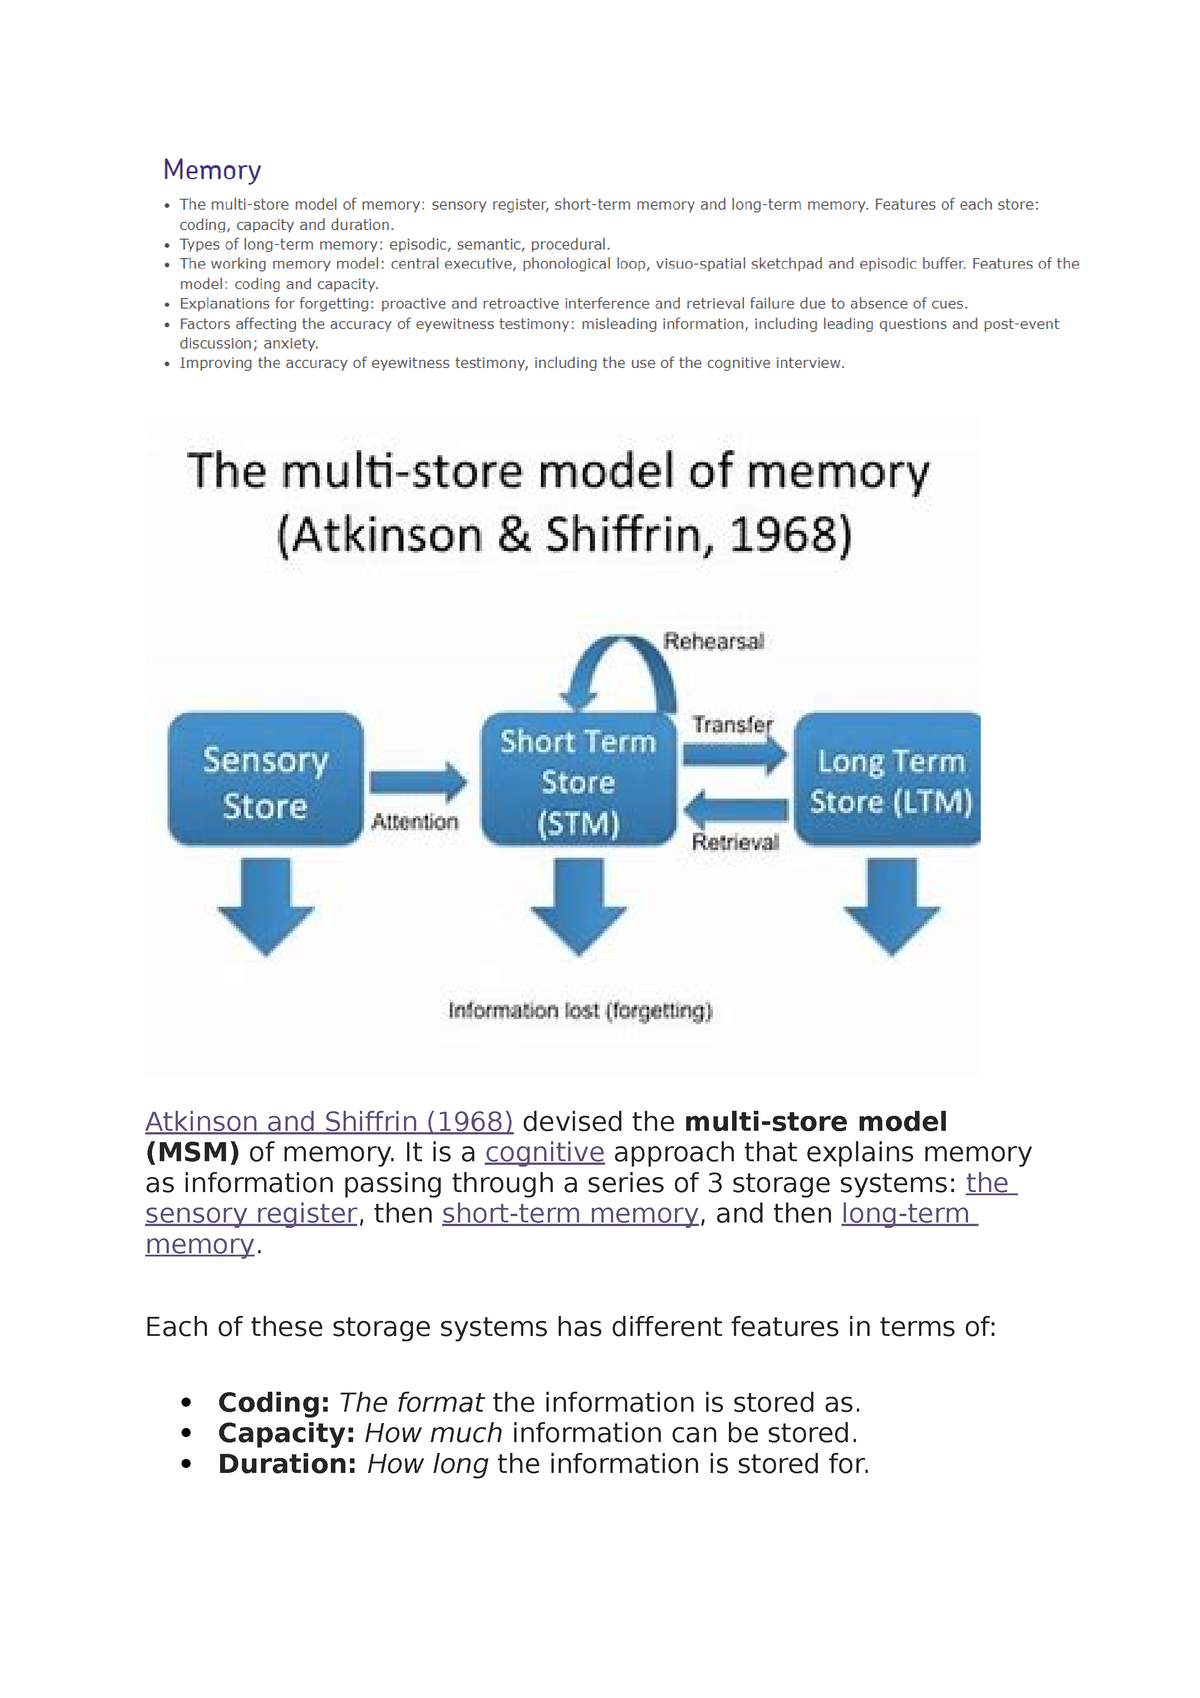 Memory notes - Atkinson and Shiffrin (1968) devised the multi-store ...